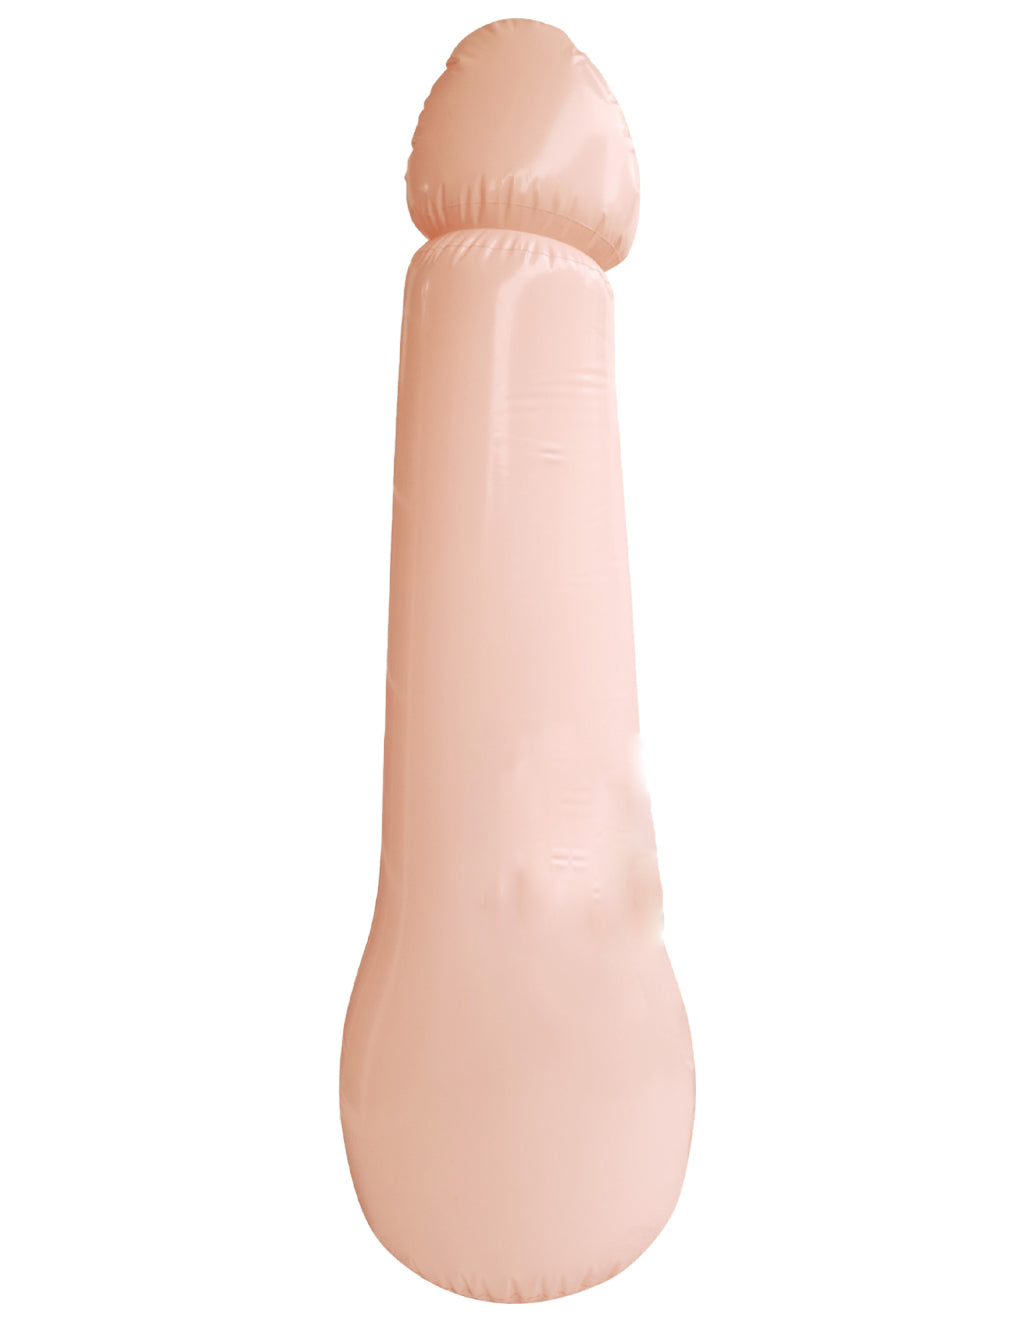 King Pecker Giant Inflatable Penis- Main